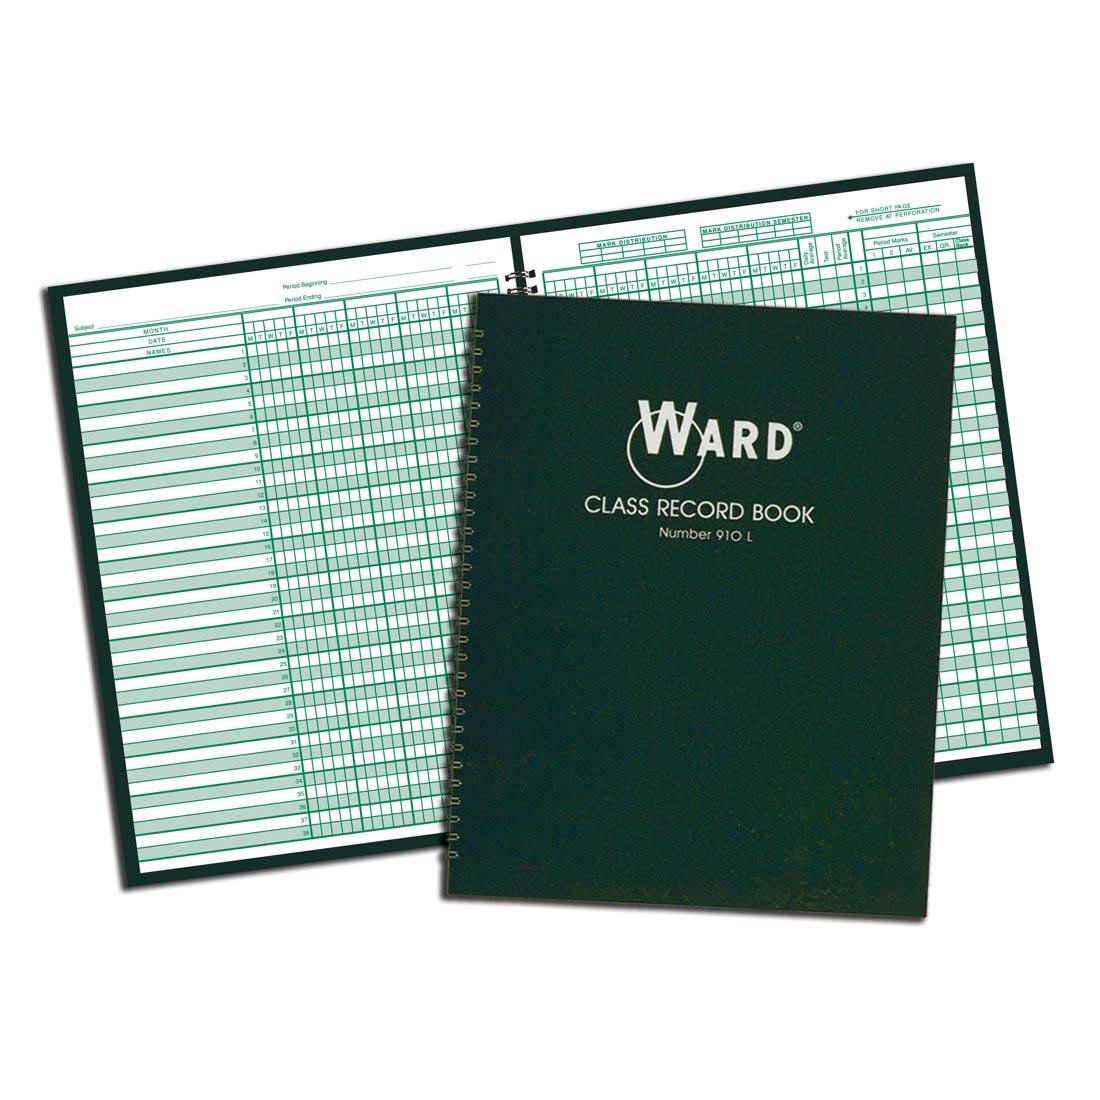 Ward Class Record Book, for 9-10 Week Grading Periods, shown both open and closed